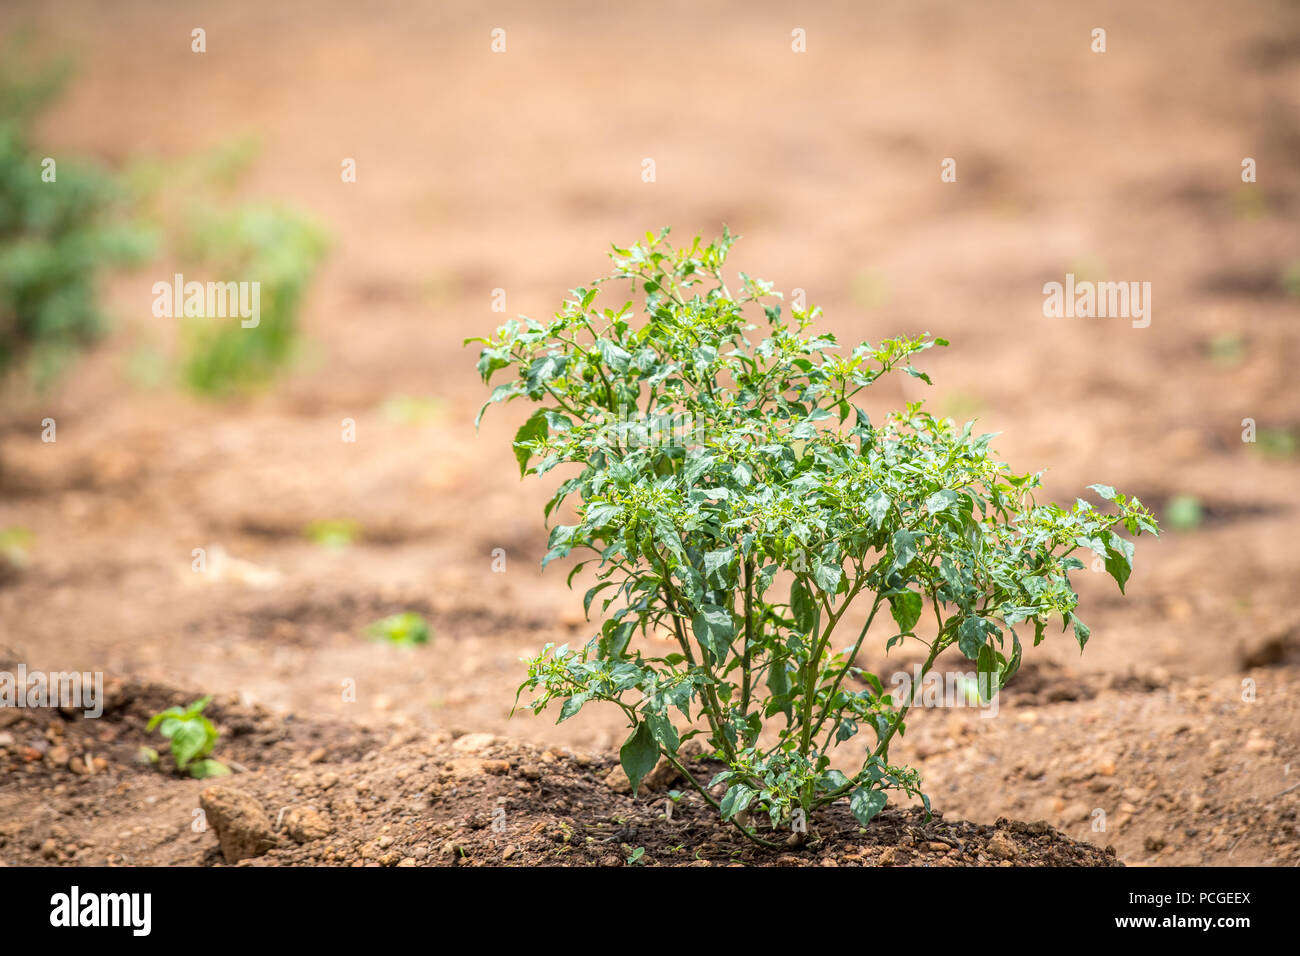 A pepper plant in the early stages of growth in Ganta, Liberia Stock Photo